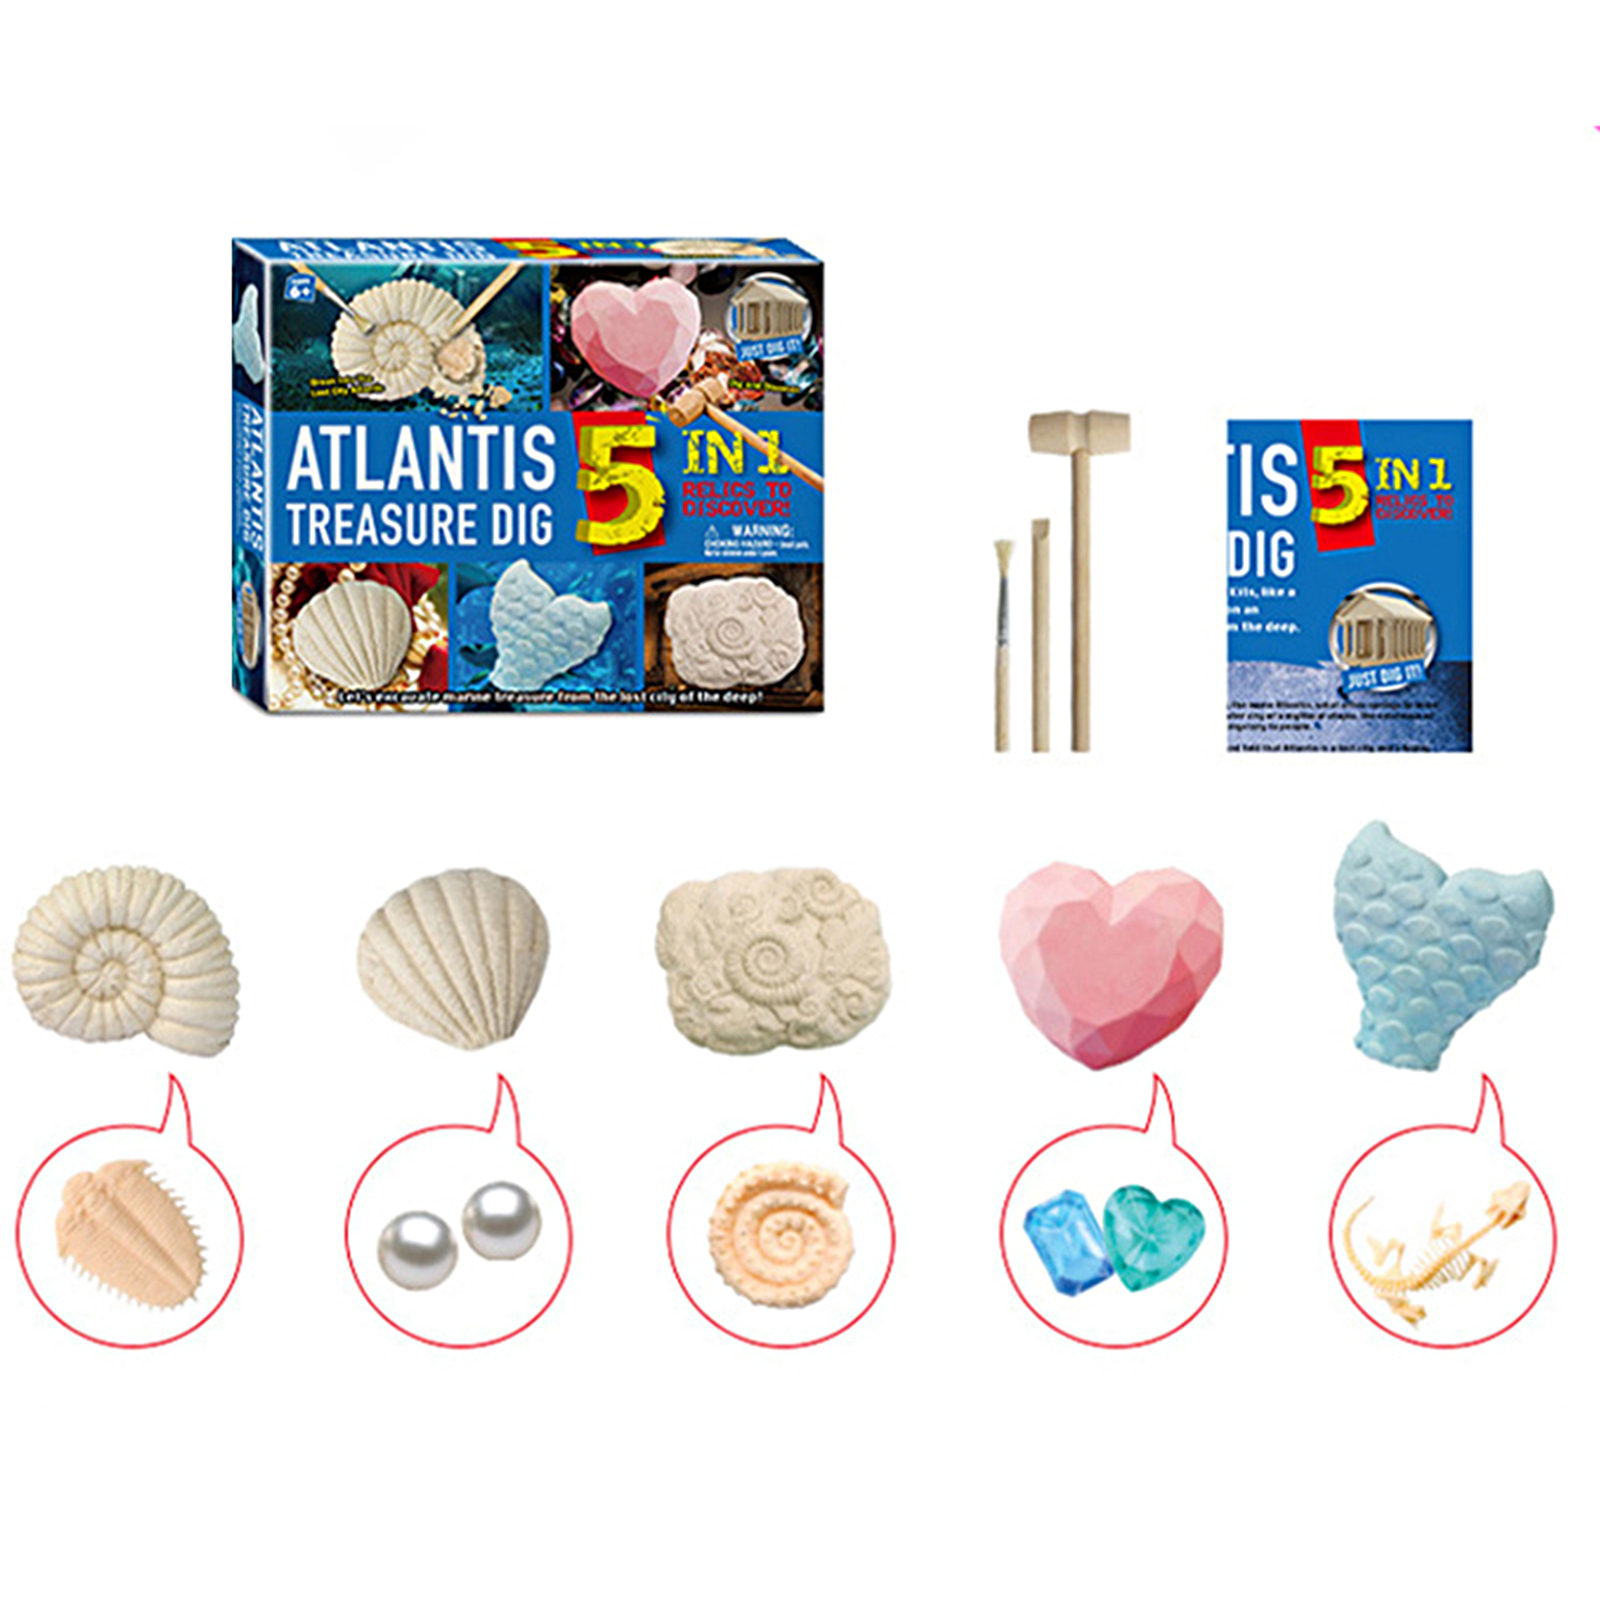 Fossils Dig Kit With Tools 5 In 1 Science Magic Treasure Digging Set Educational Toys For Geology Enthusiasts